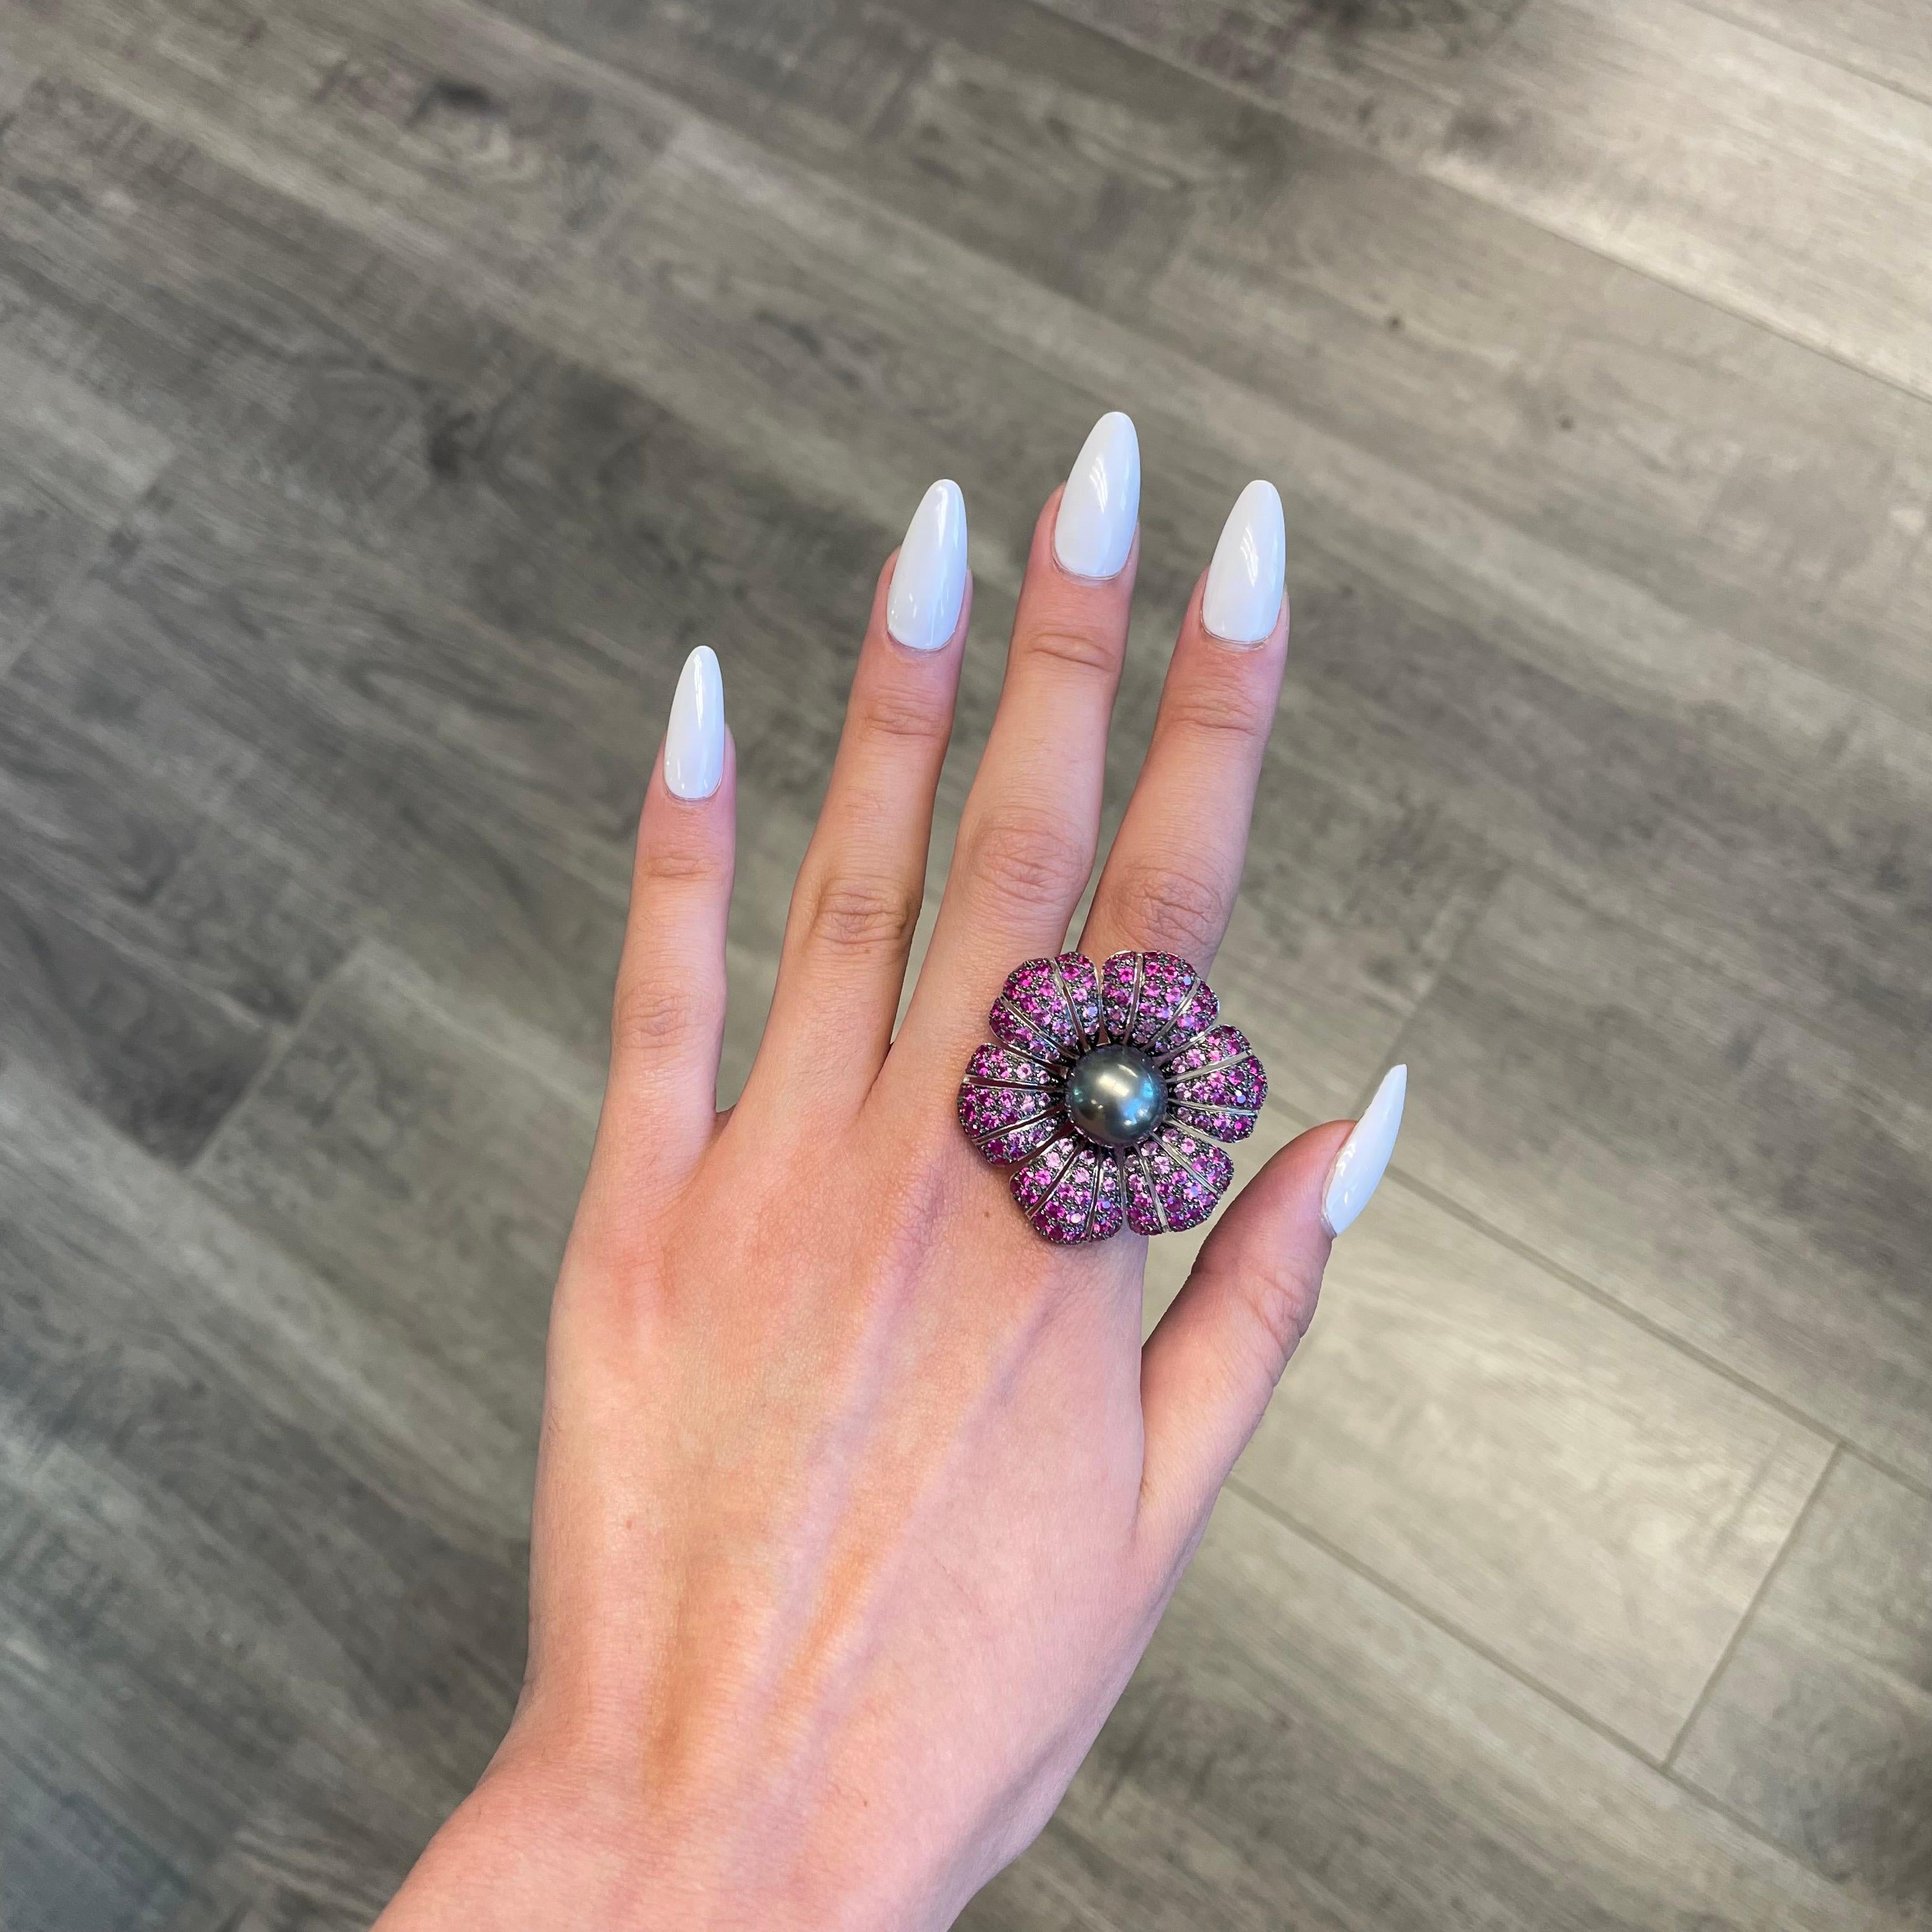 Exquisite and unique multi gemstone floral ring. 
Center Tahitian pearl surrounded by 8.38ct of rubies and pink sapphires heat, set in 18-karat white gold with black rhodium. 
Accommodated with an up to date appraisal by a GIA G.G. upon request.